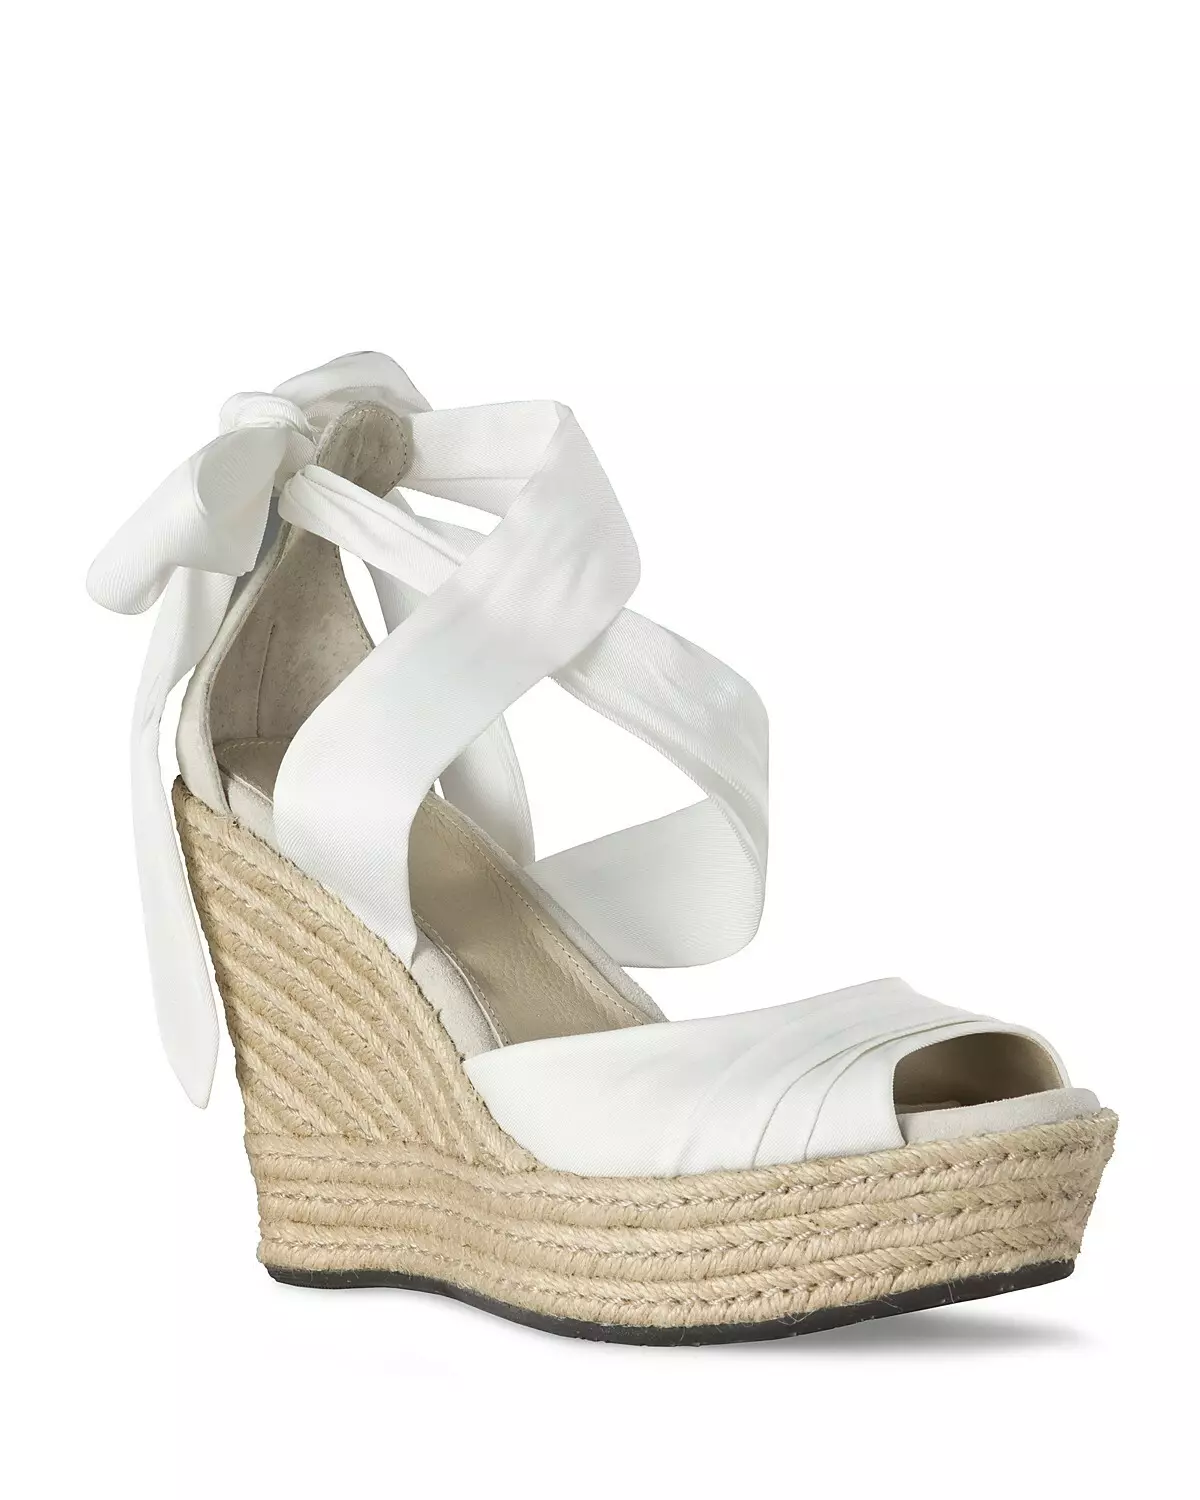 White wedge shoes (49 photos) 2375_11